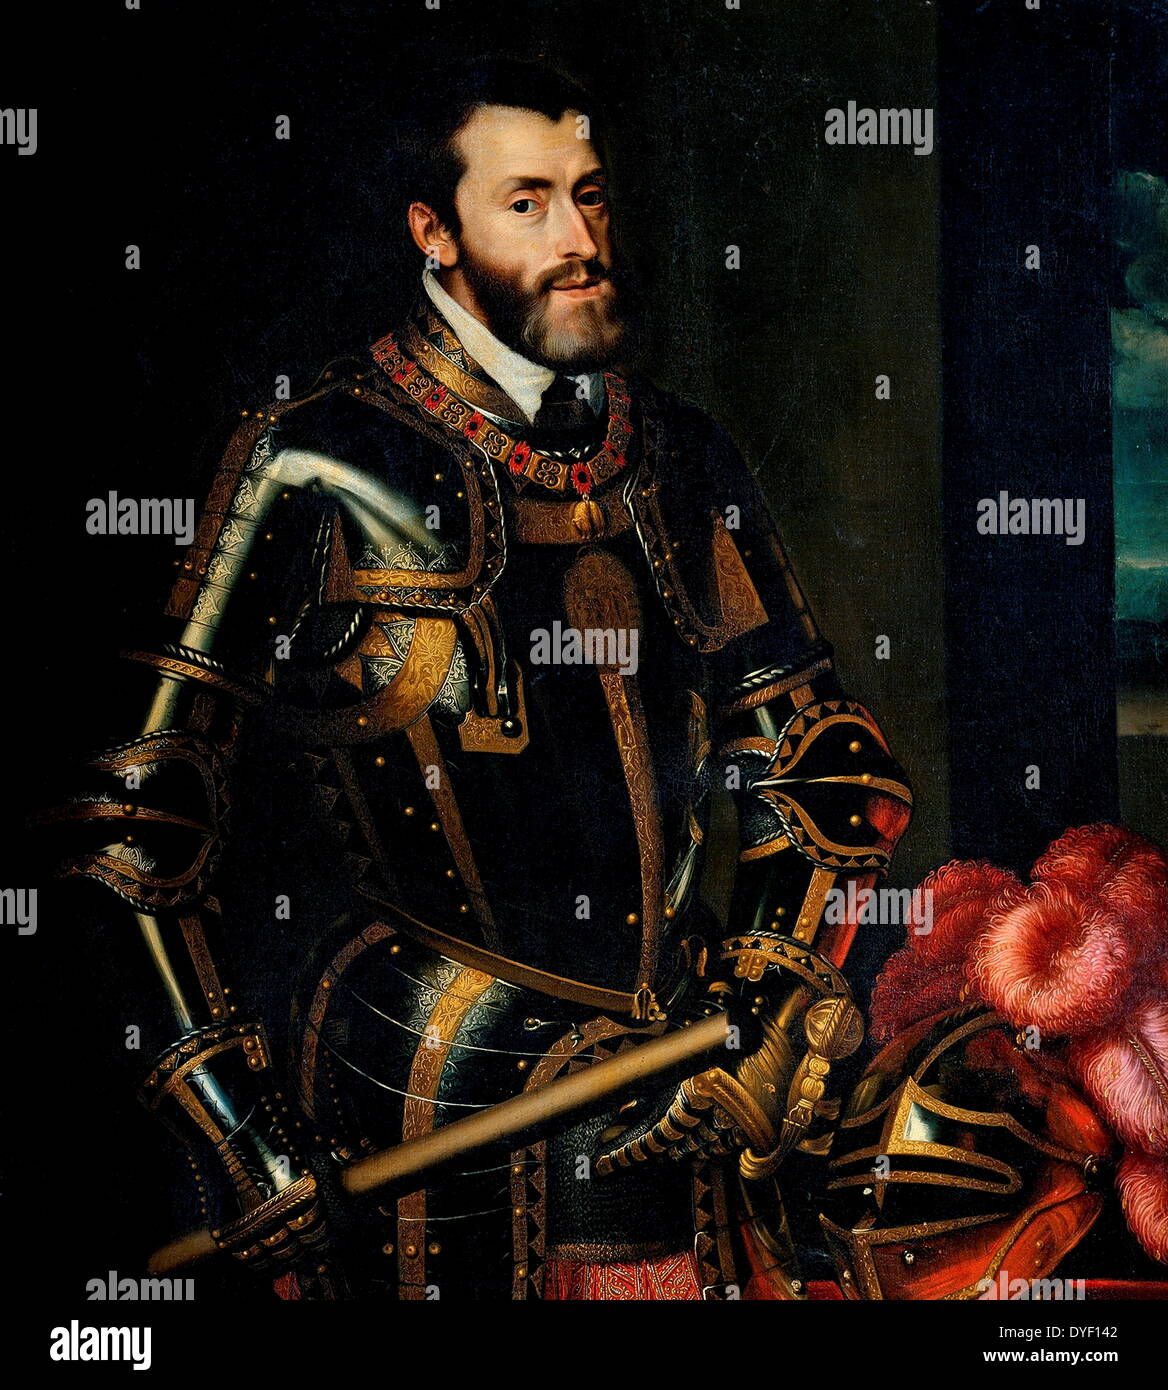 Painting of Charles V (Also known as Carlos I, Karel V, Karl V, Carlo V and Charles Quint). Born 24th February 1500, died 21st September 1558 in the Monastery of Yuste, Spain. Was ruler of the Holy Roman Empire from 1519 and the Spanish Empire (as Charles I) from 1516 until his voluntary retirement and abdication in 1556. His rule was then passed on to his younger brother Ferdinand I and his son Philip II. Oil on Canvas. Stock Photo